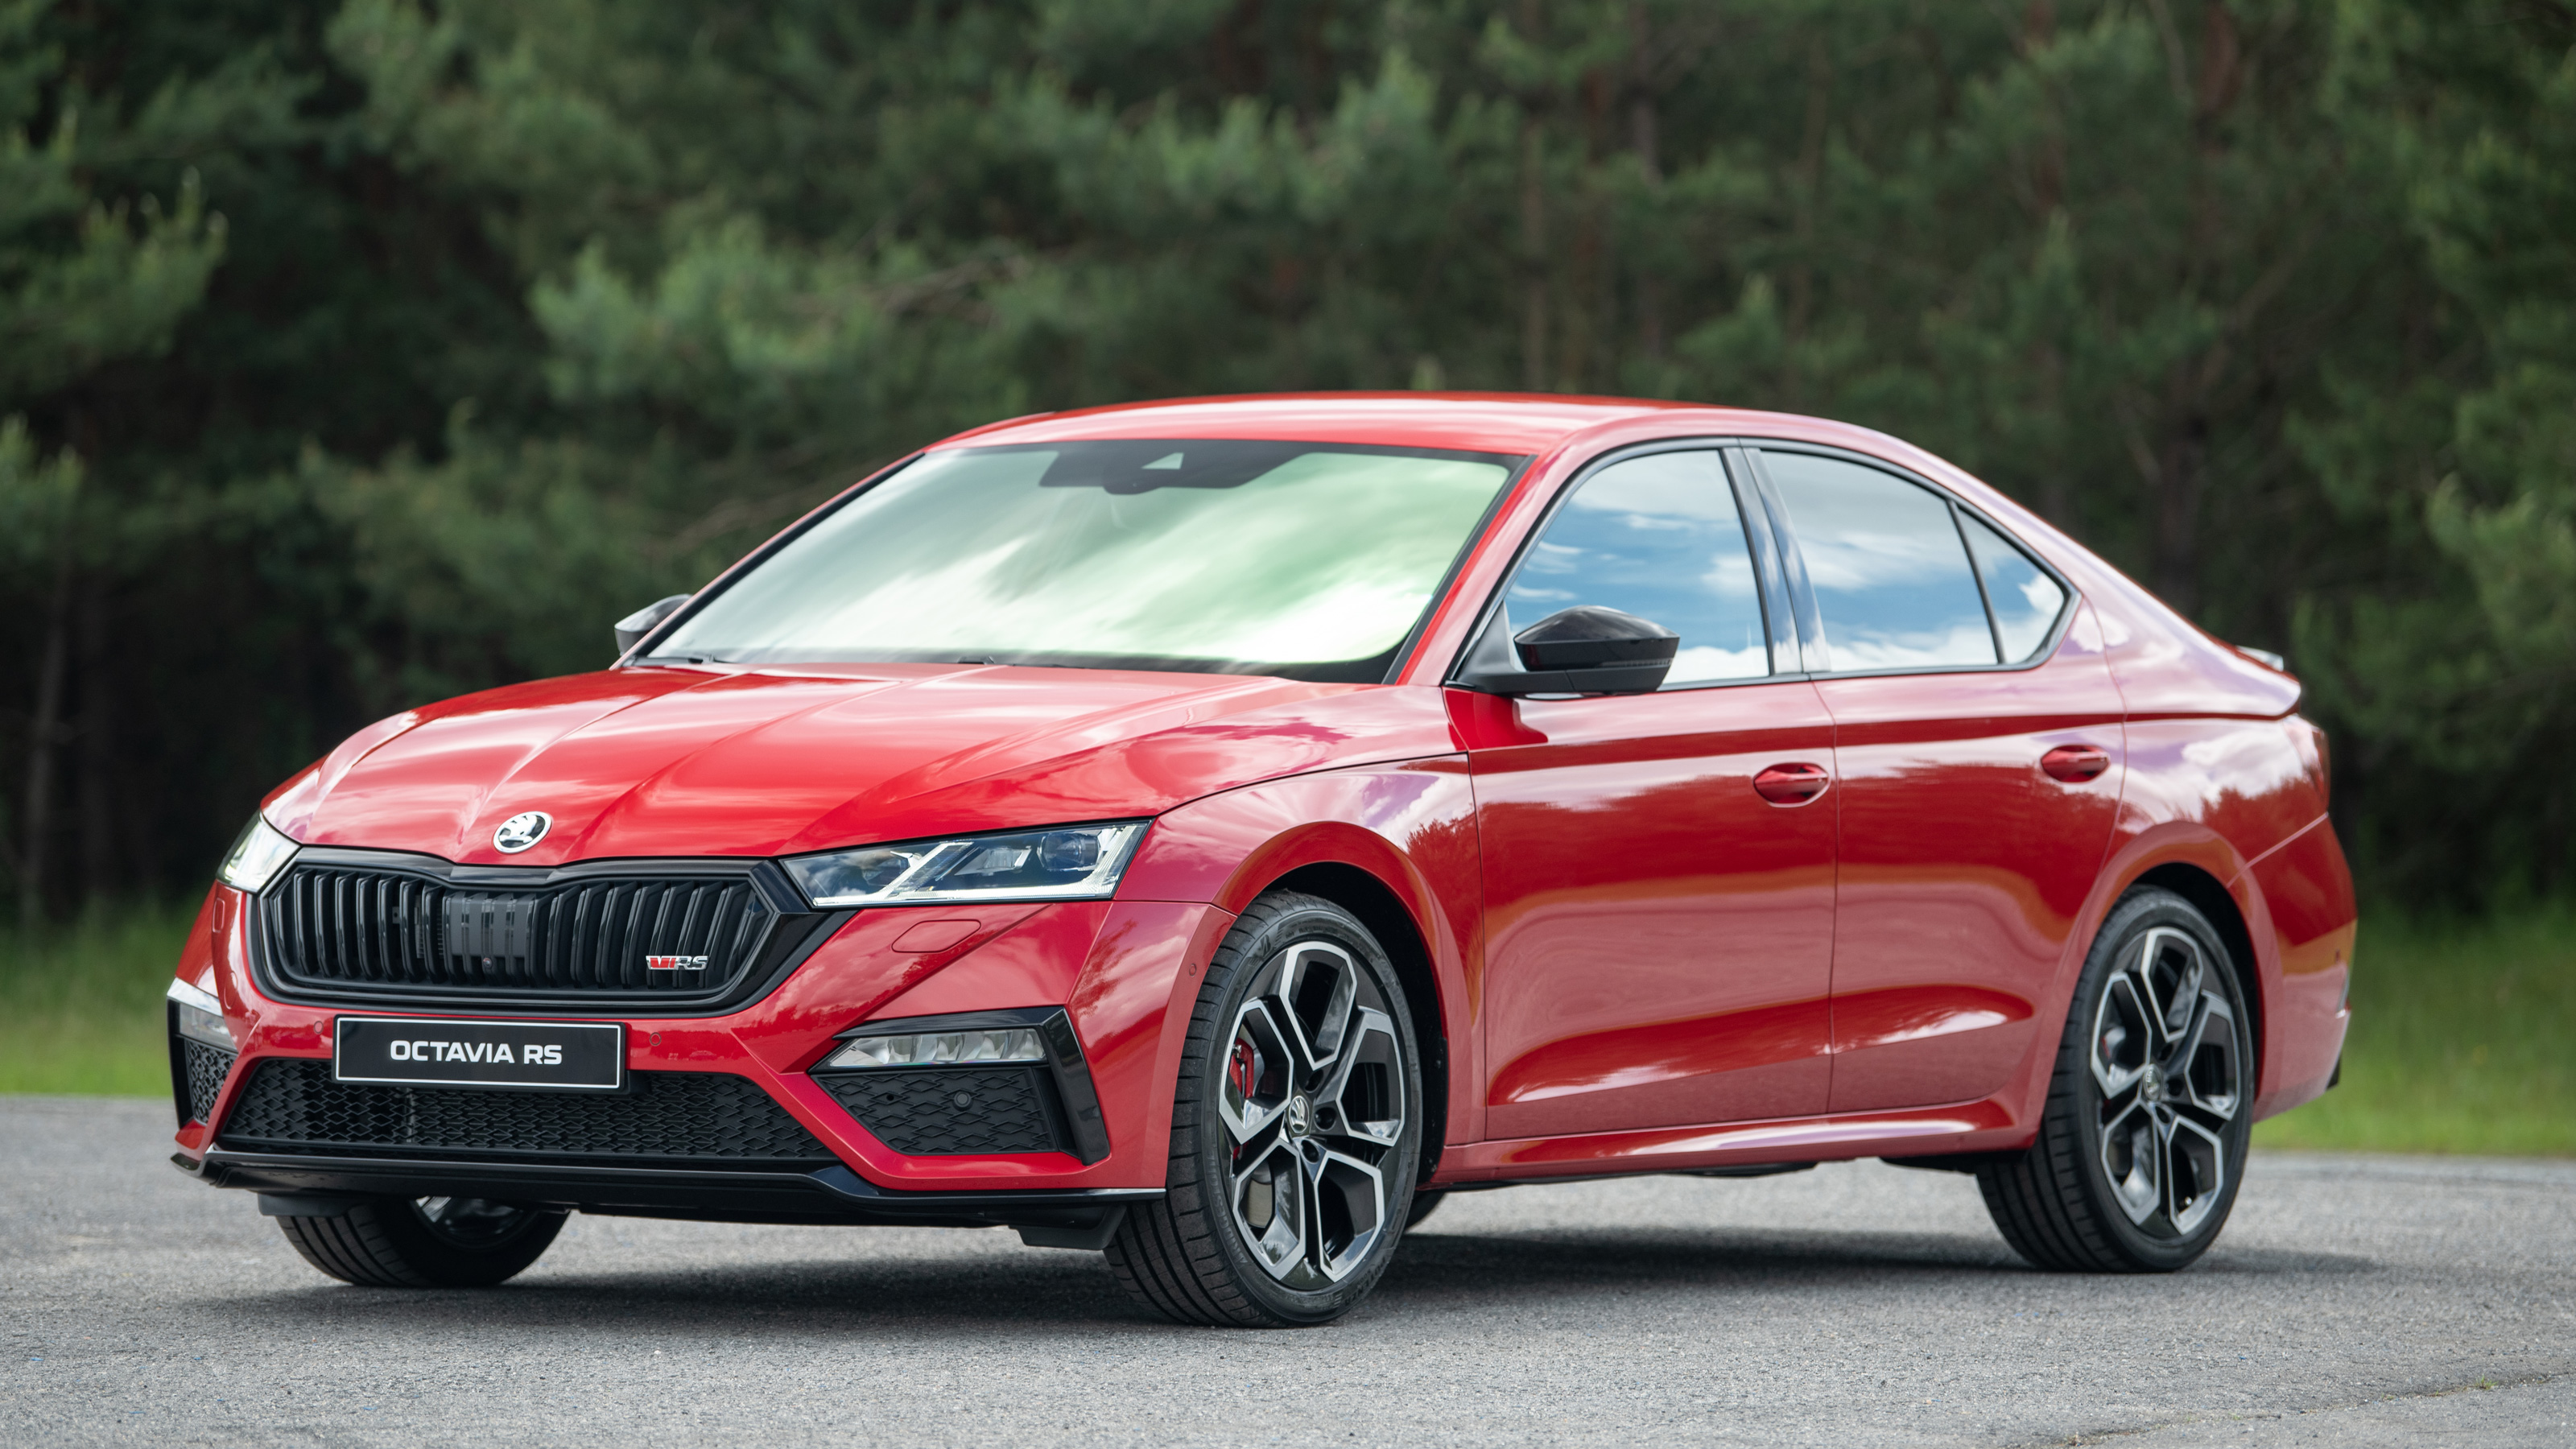 New Skoda Octavia vRS line-up completed as petrol and 